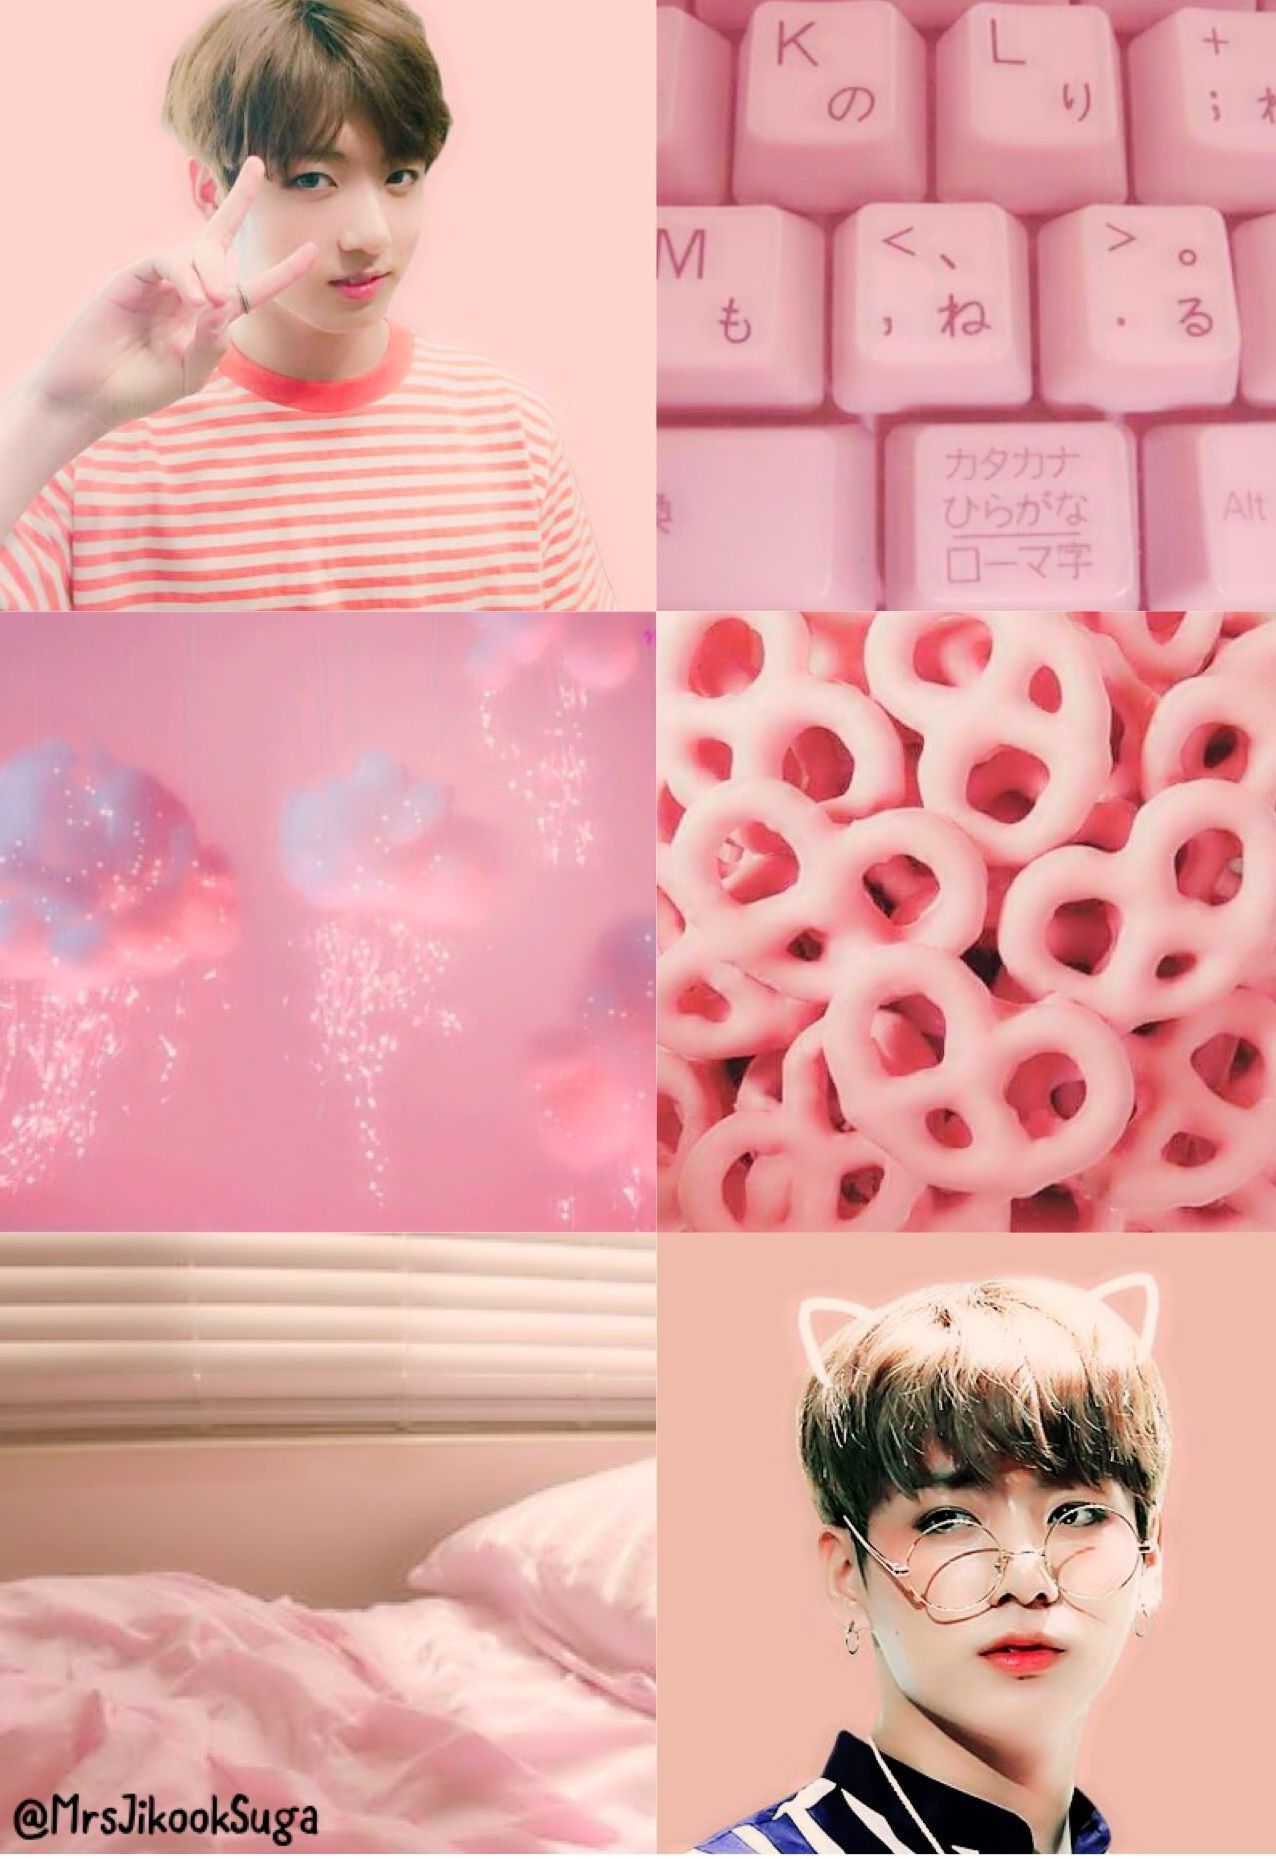 Aesthetic wallpaper of Jimin from BTS with a pink background - Jungkook, pink